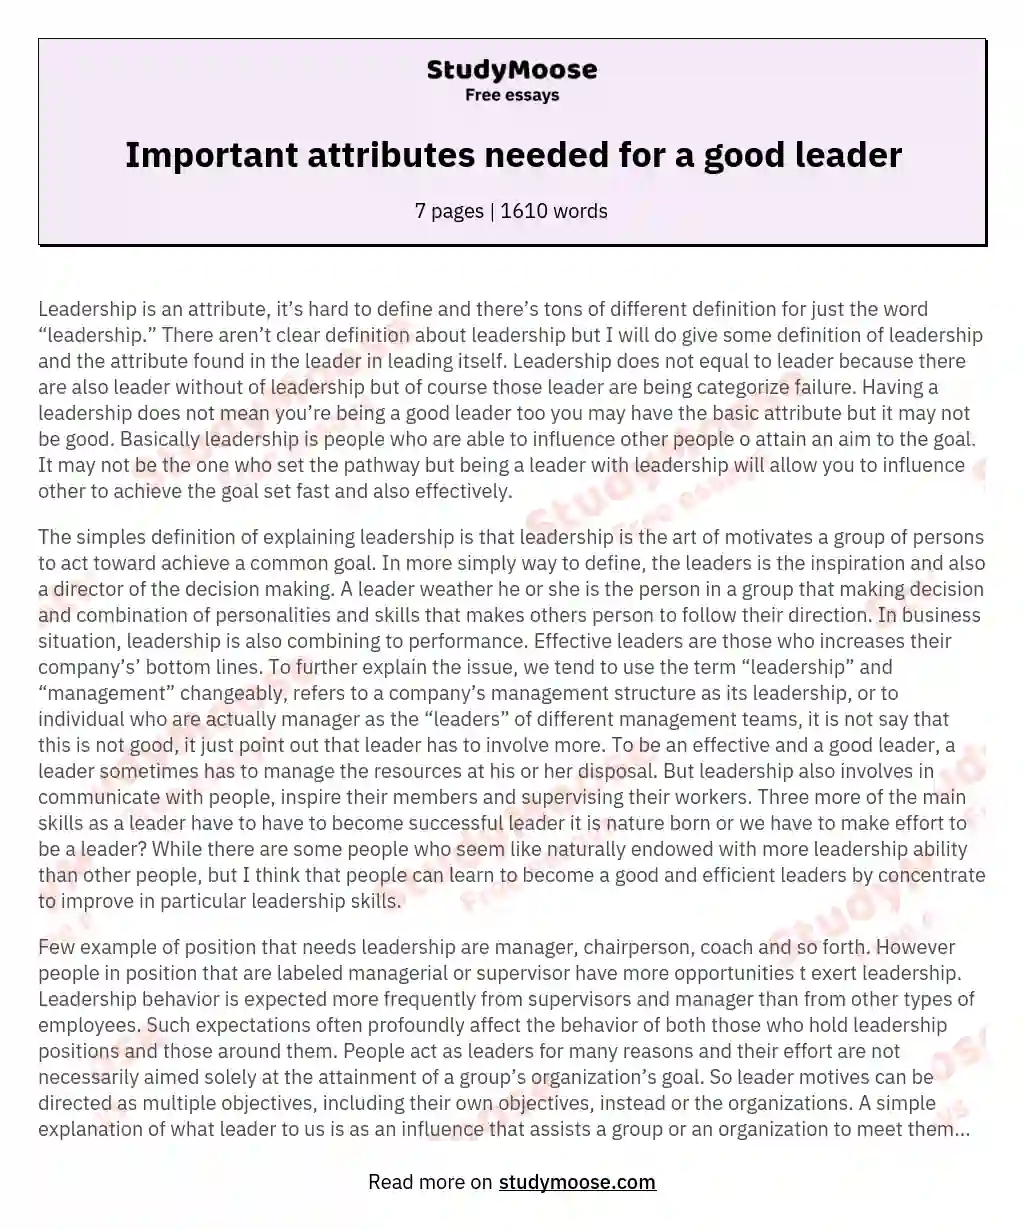 Important attributes needed for a good leader